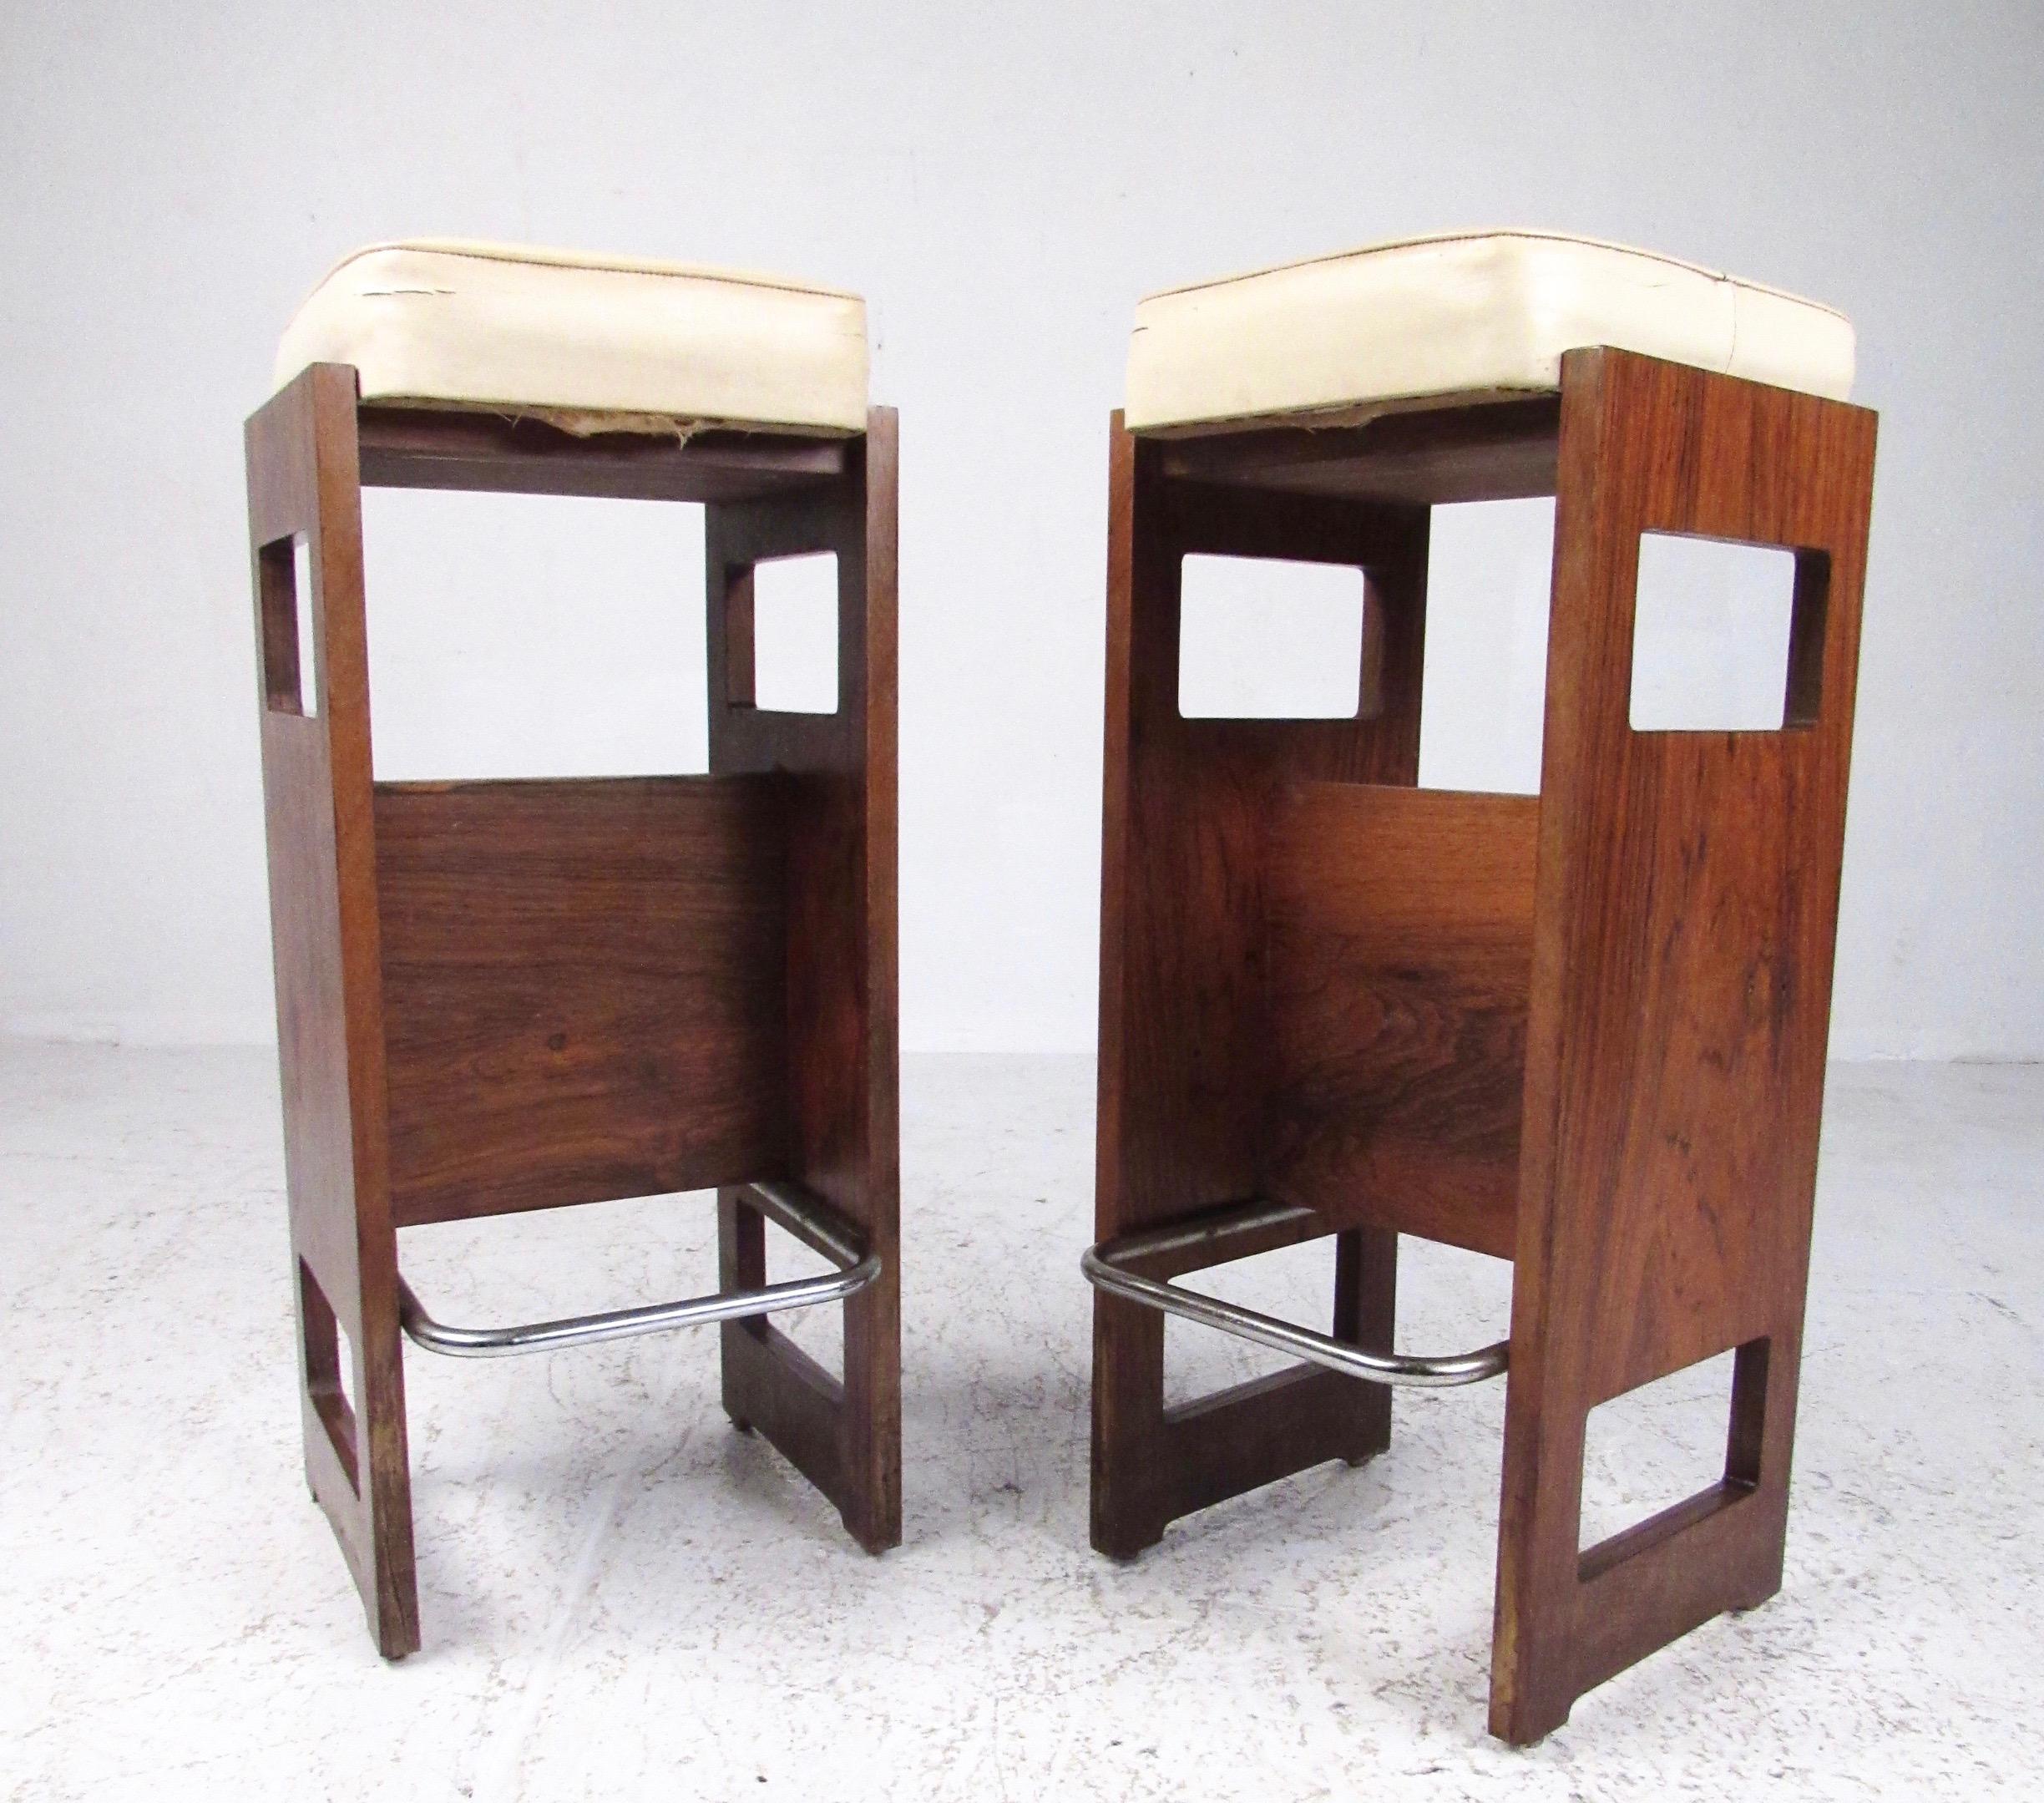 Stylish pair of vintage modern stools feature vinyl seats and sculptural rosewood bases. The midcentury Italian pair stands a versatile 28 inches tall, for a striking addition to home or business counter or bar seating. Please confirm item location